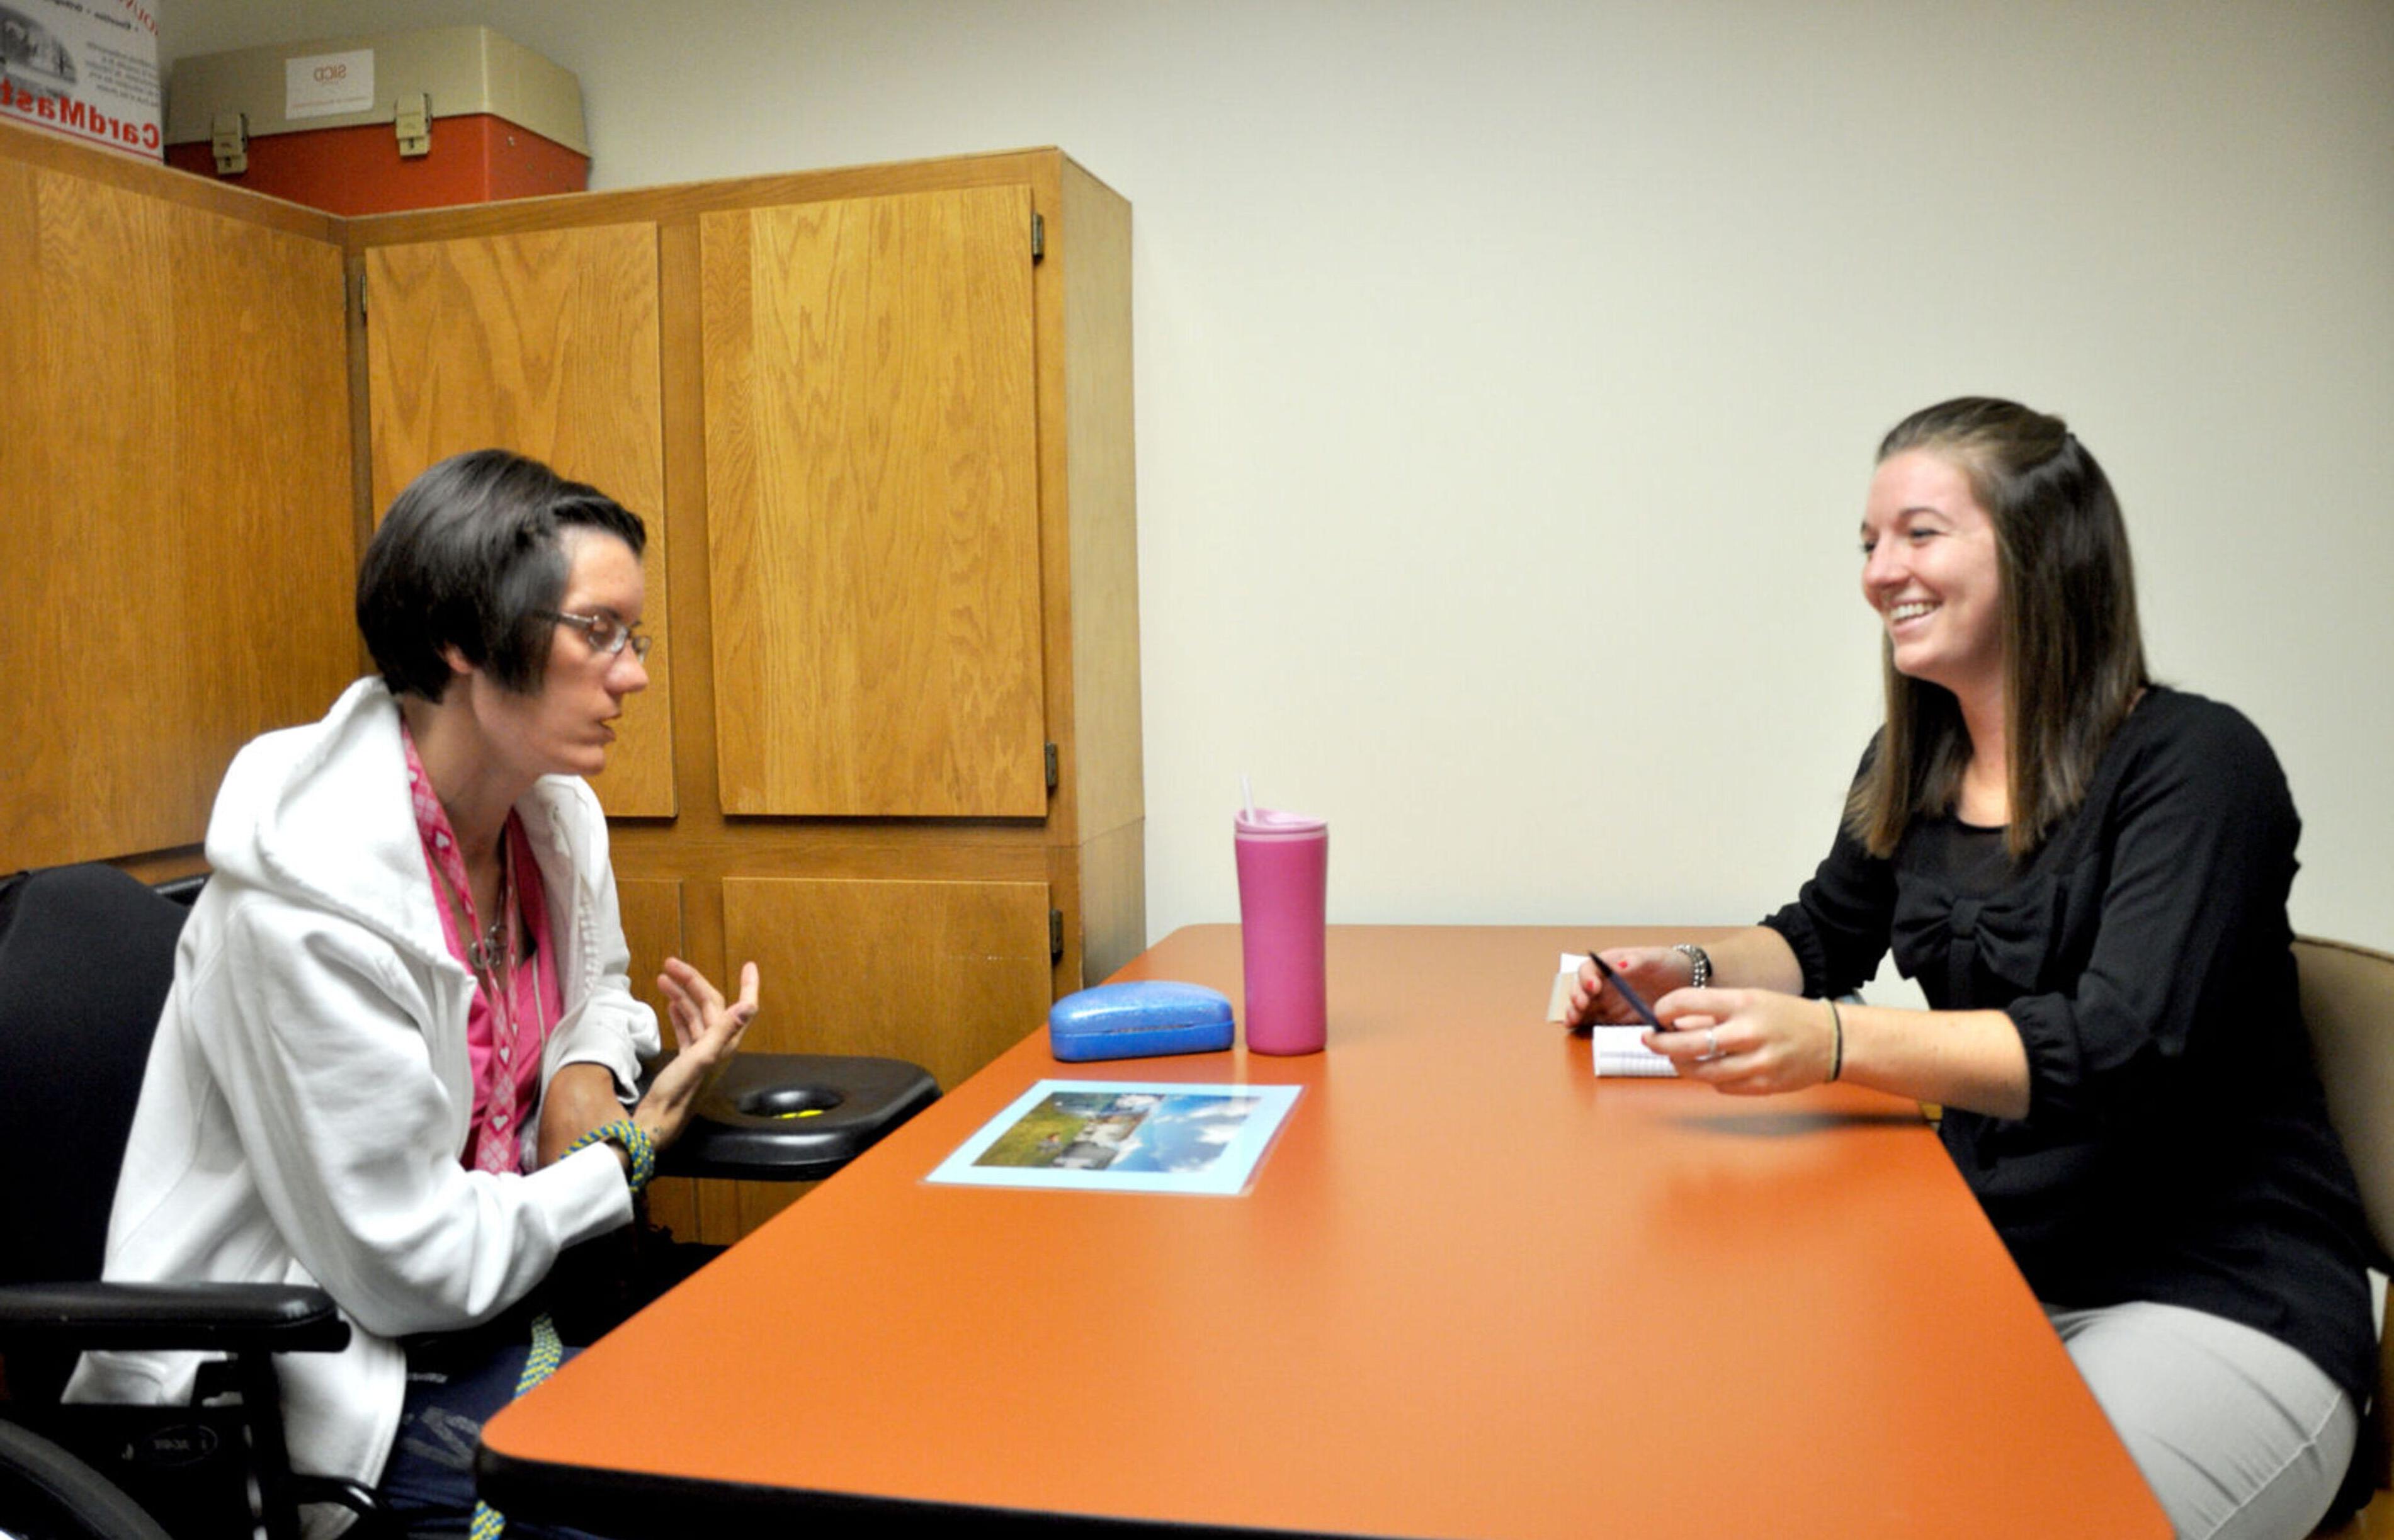 A student works with a client in the Elmira College Speech and Hearing Clinic